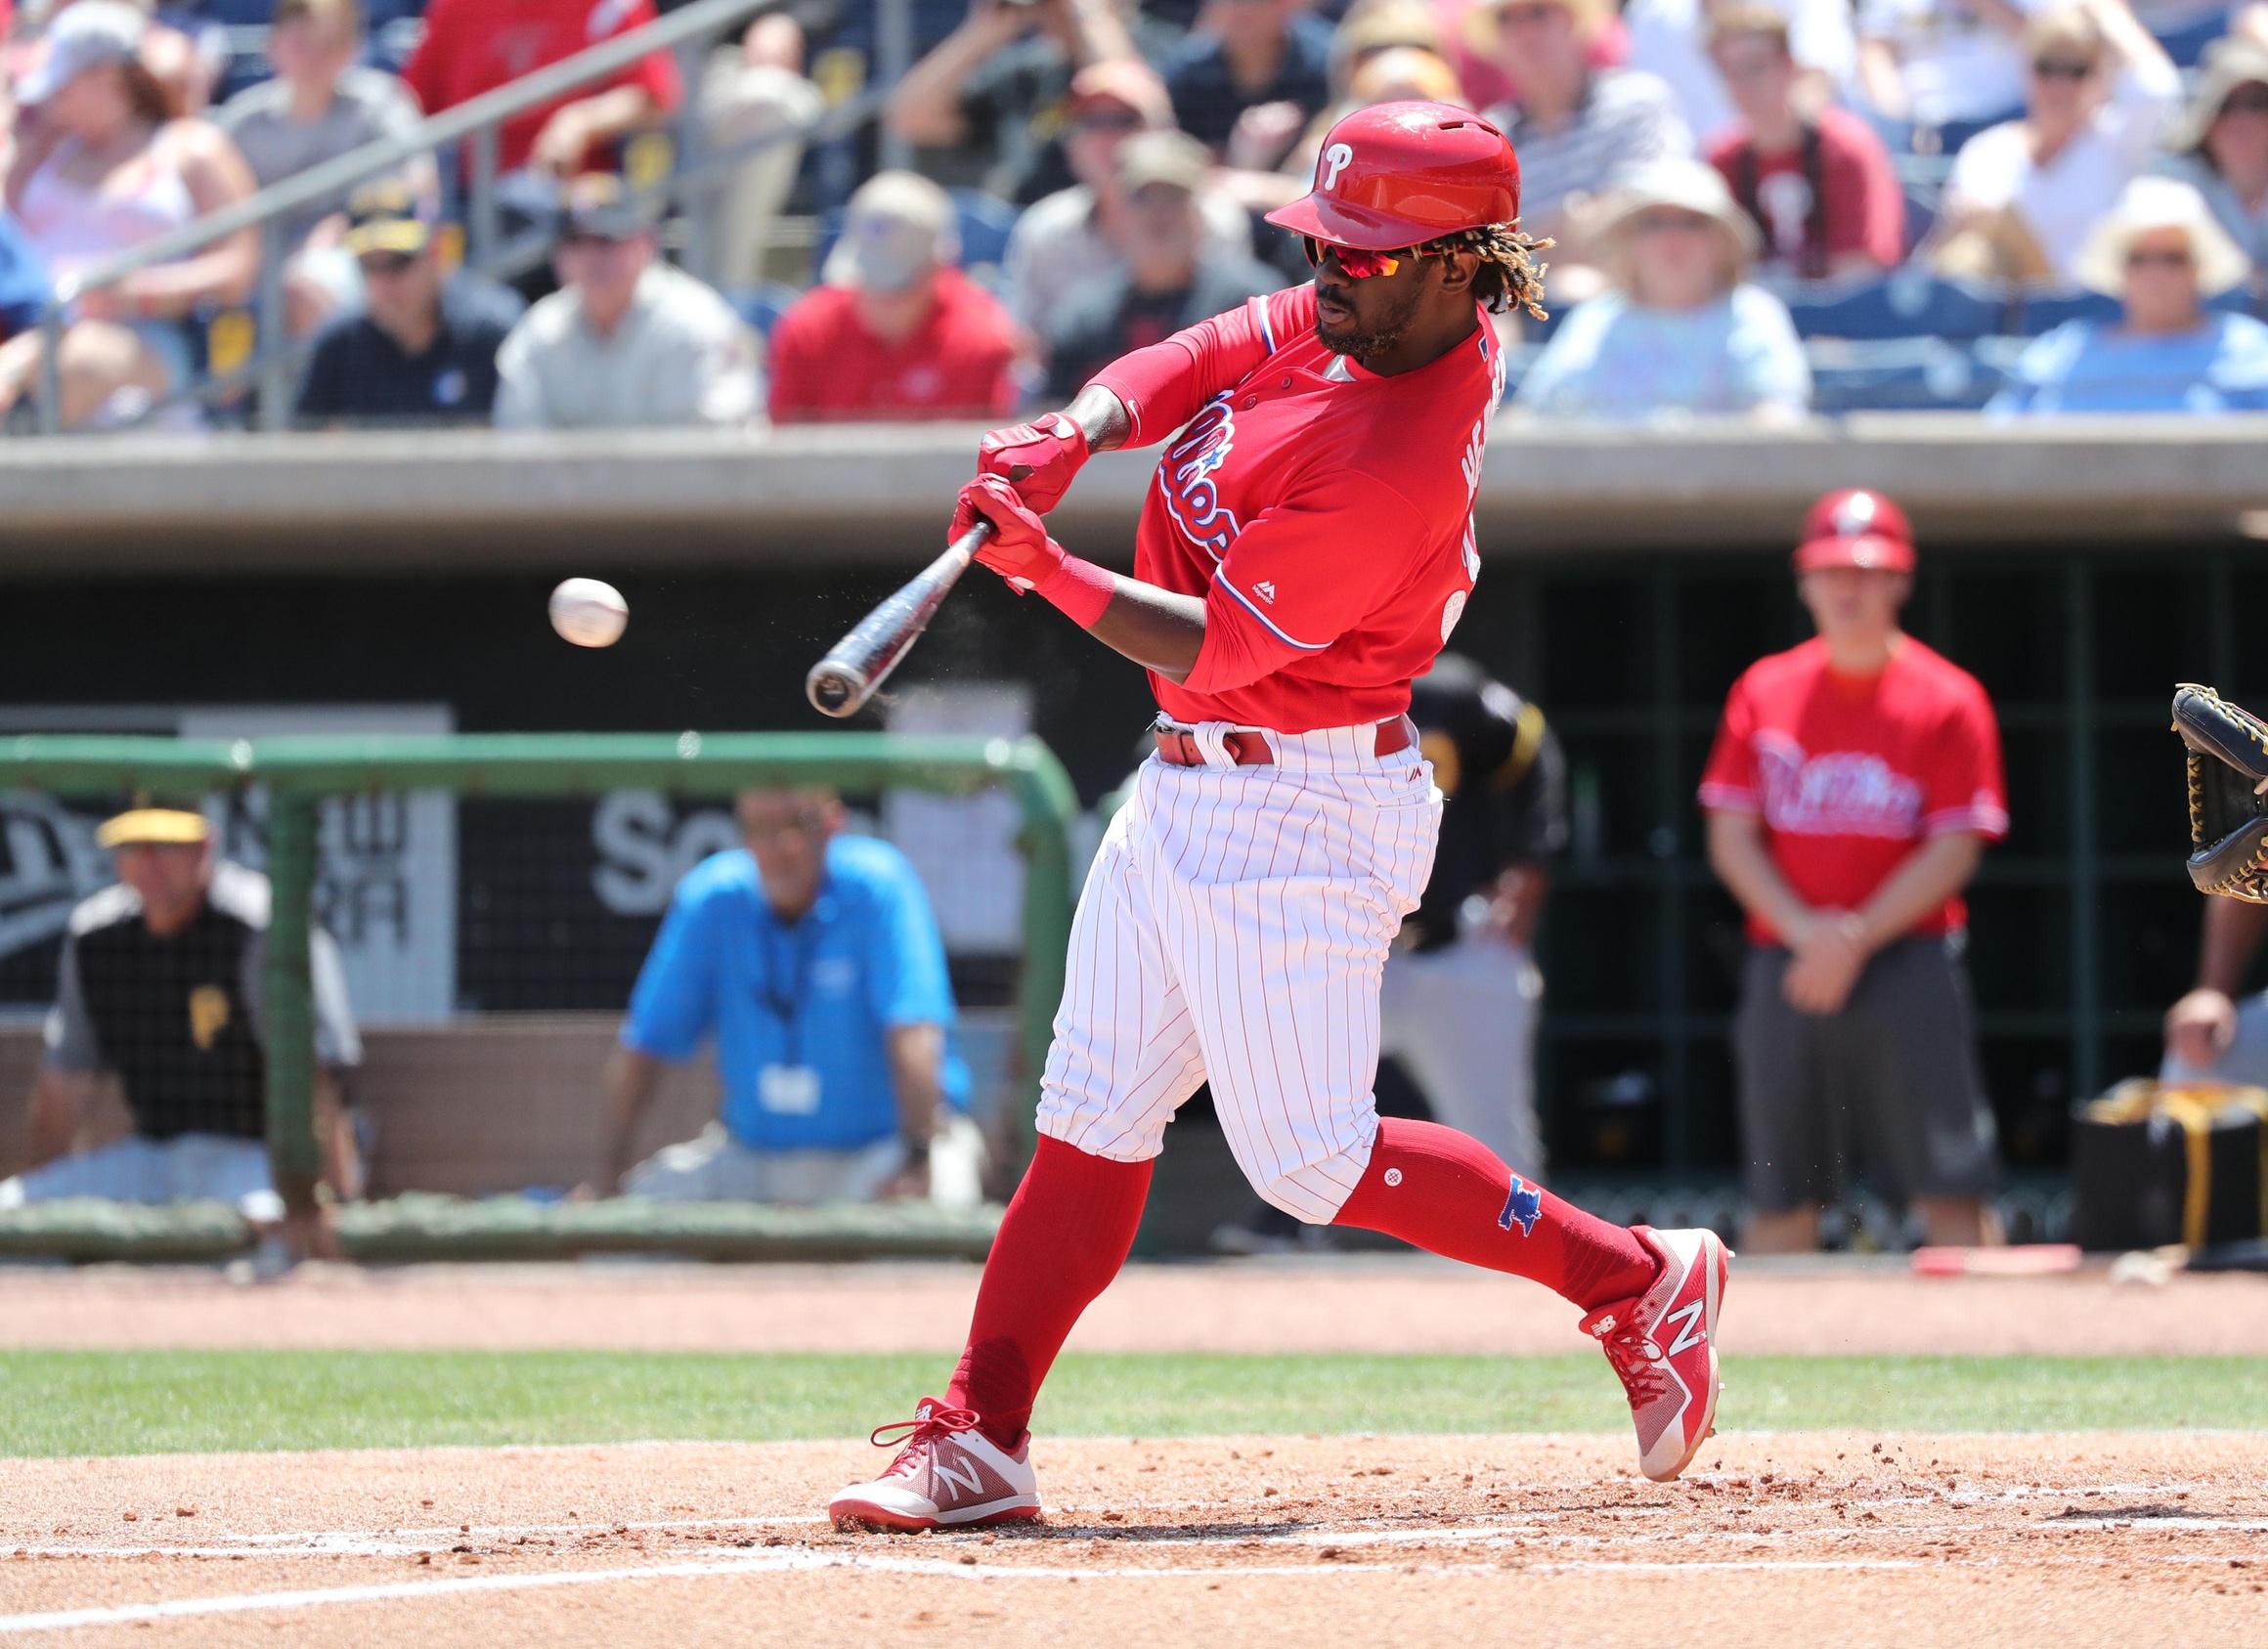 Some Thoughts on Odubel Herrera’s Absence from the Opening Day Lineup